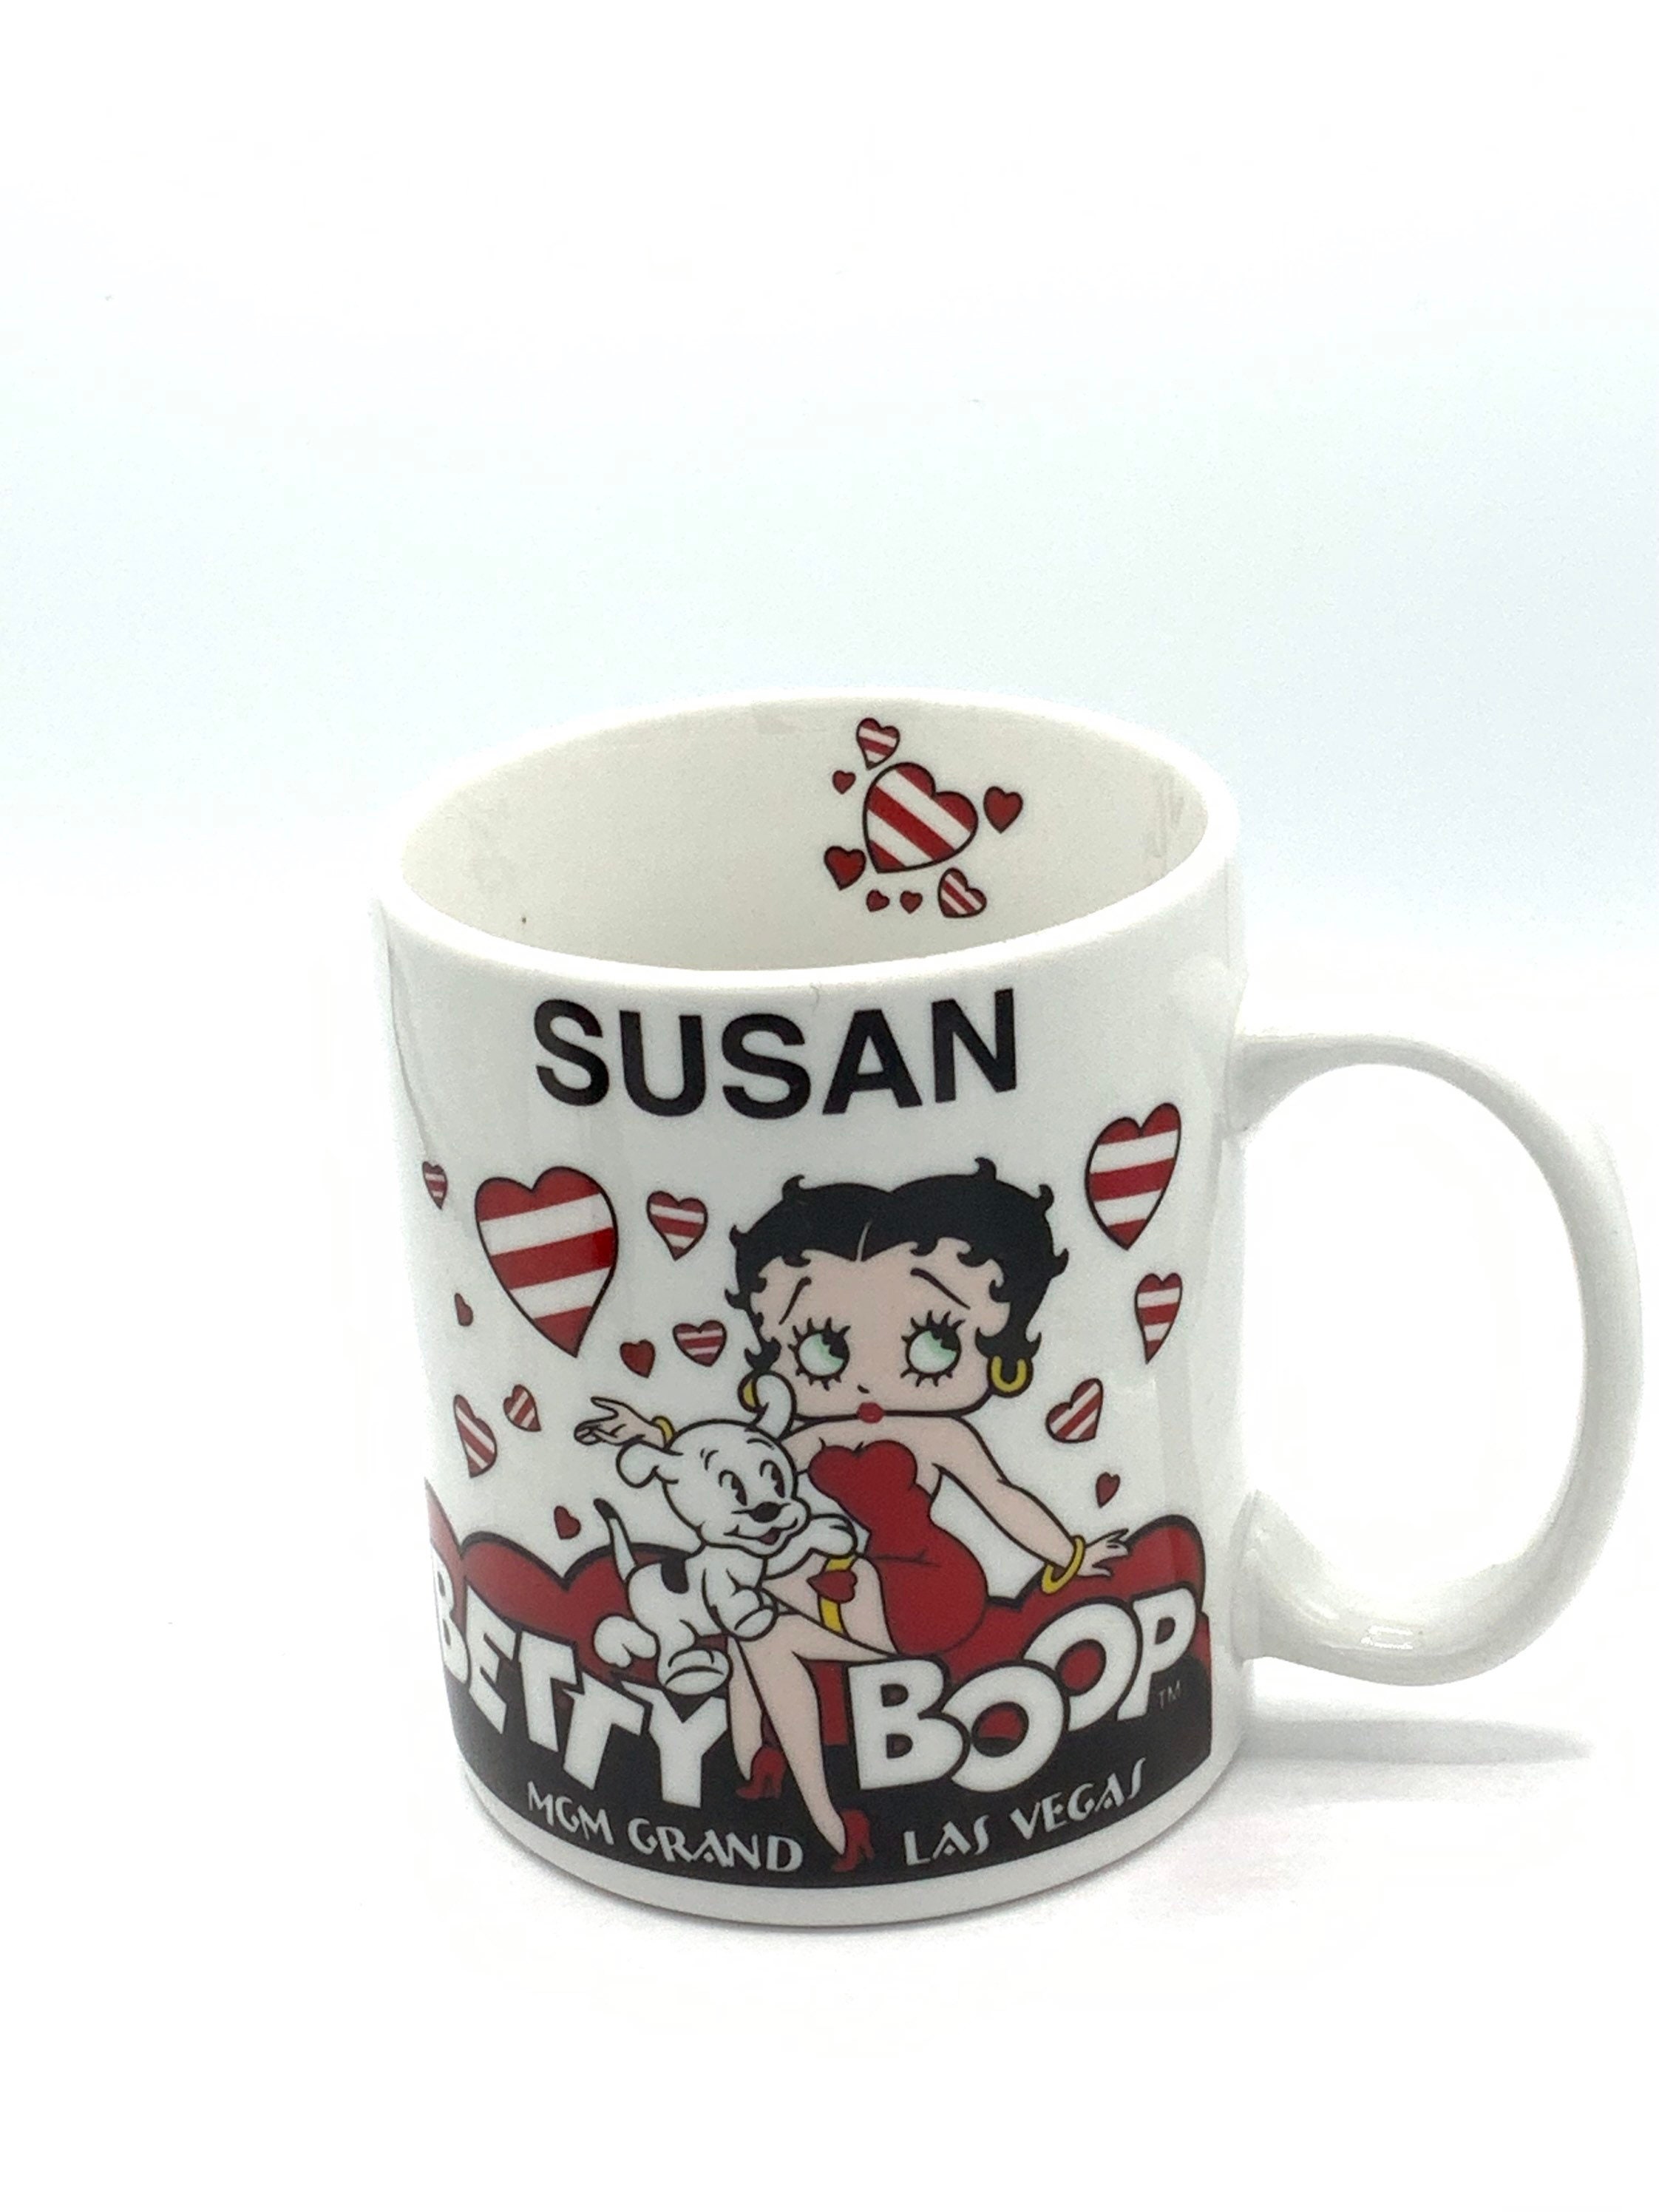 Gorgeous Collectible and Vintage Betty Boop Mug Love Susan - Etsy